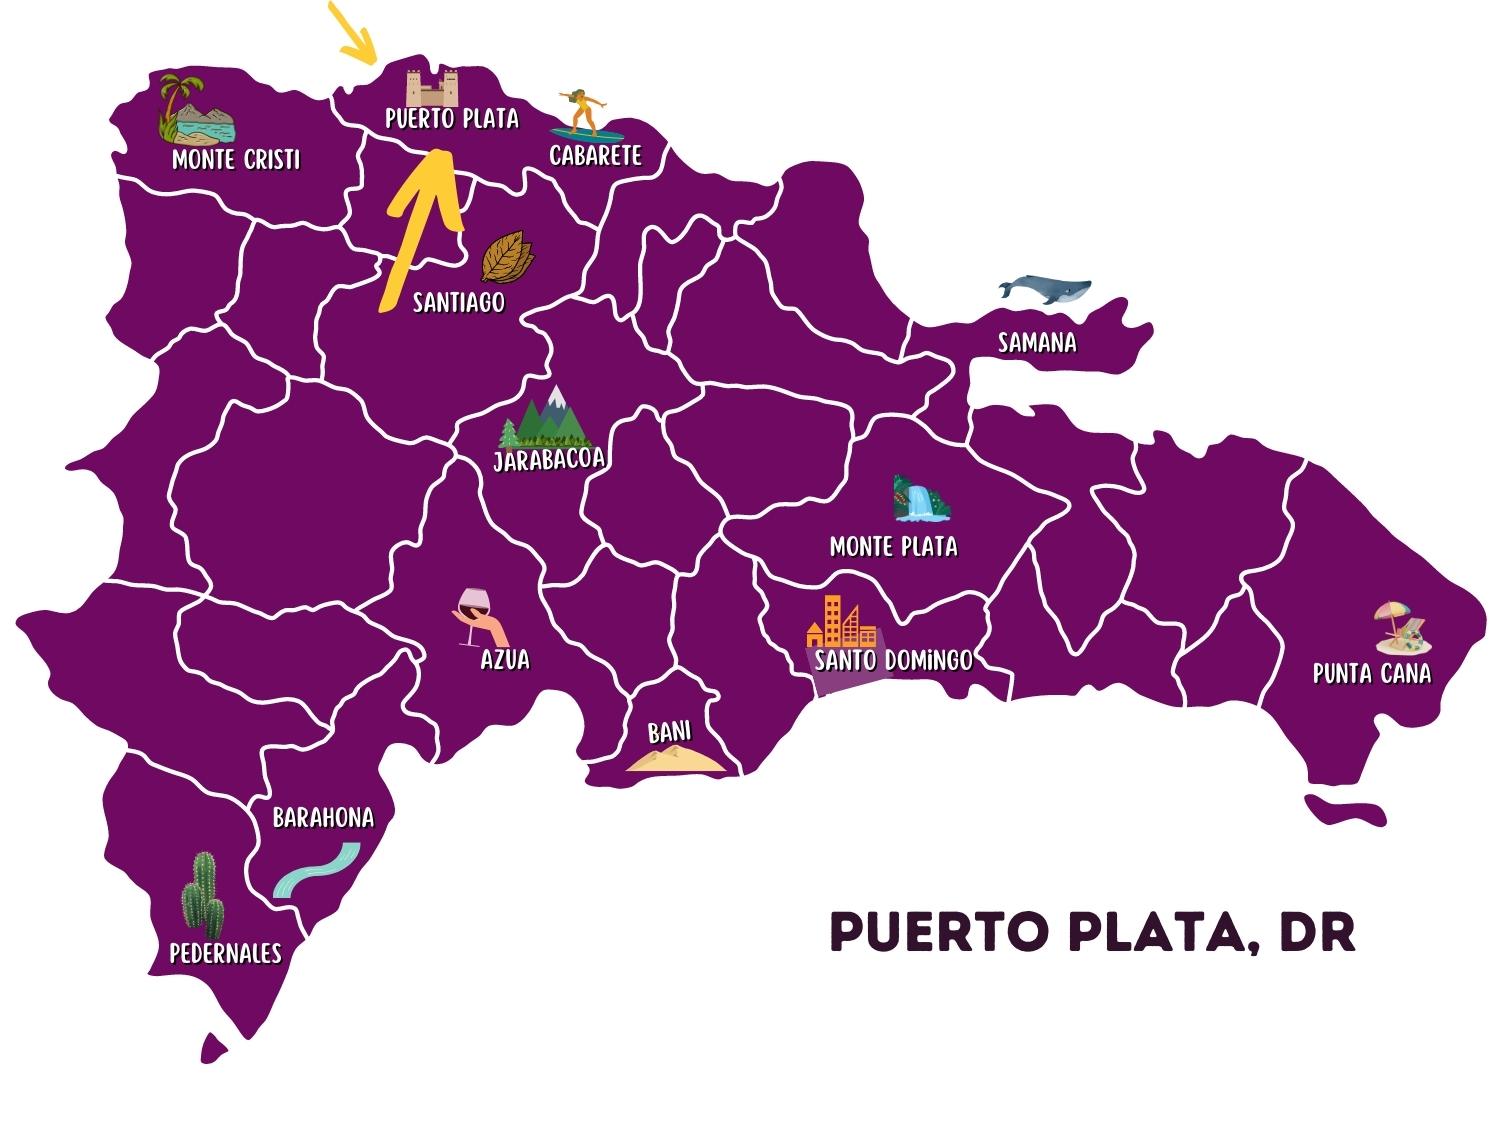 Map of the Dominican Republic with arrows that point to Puerto Plata.